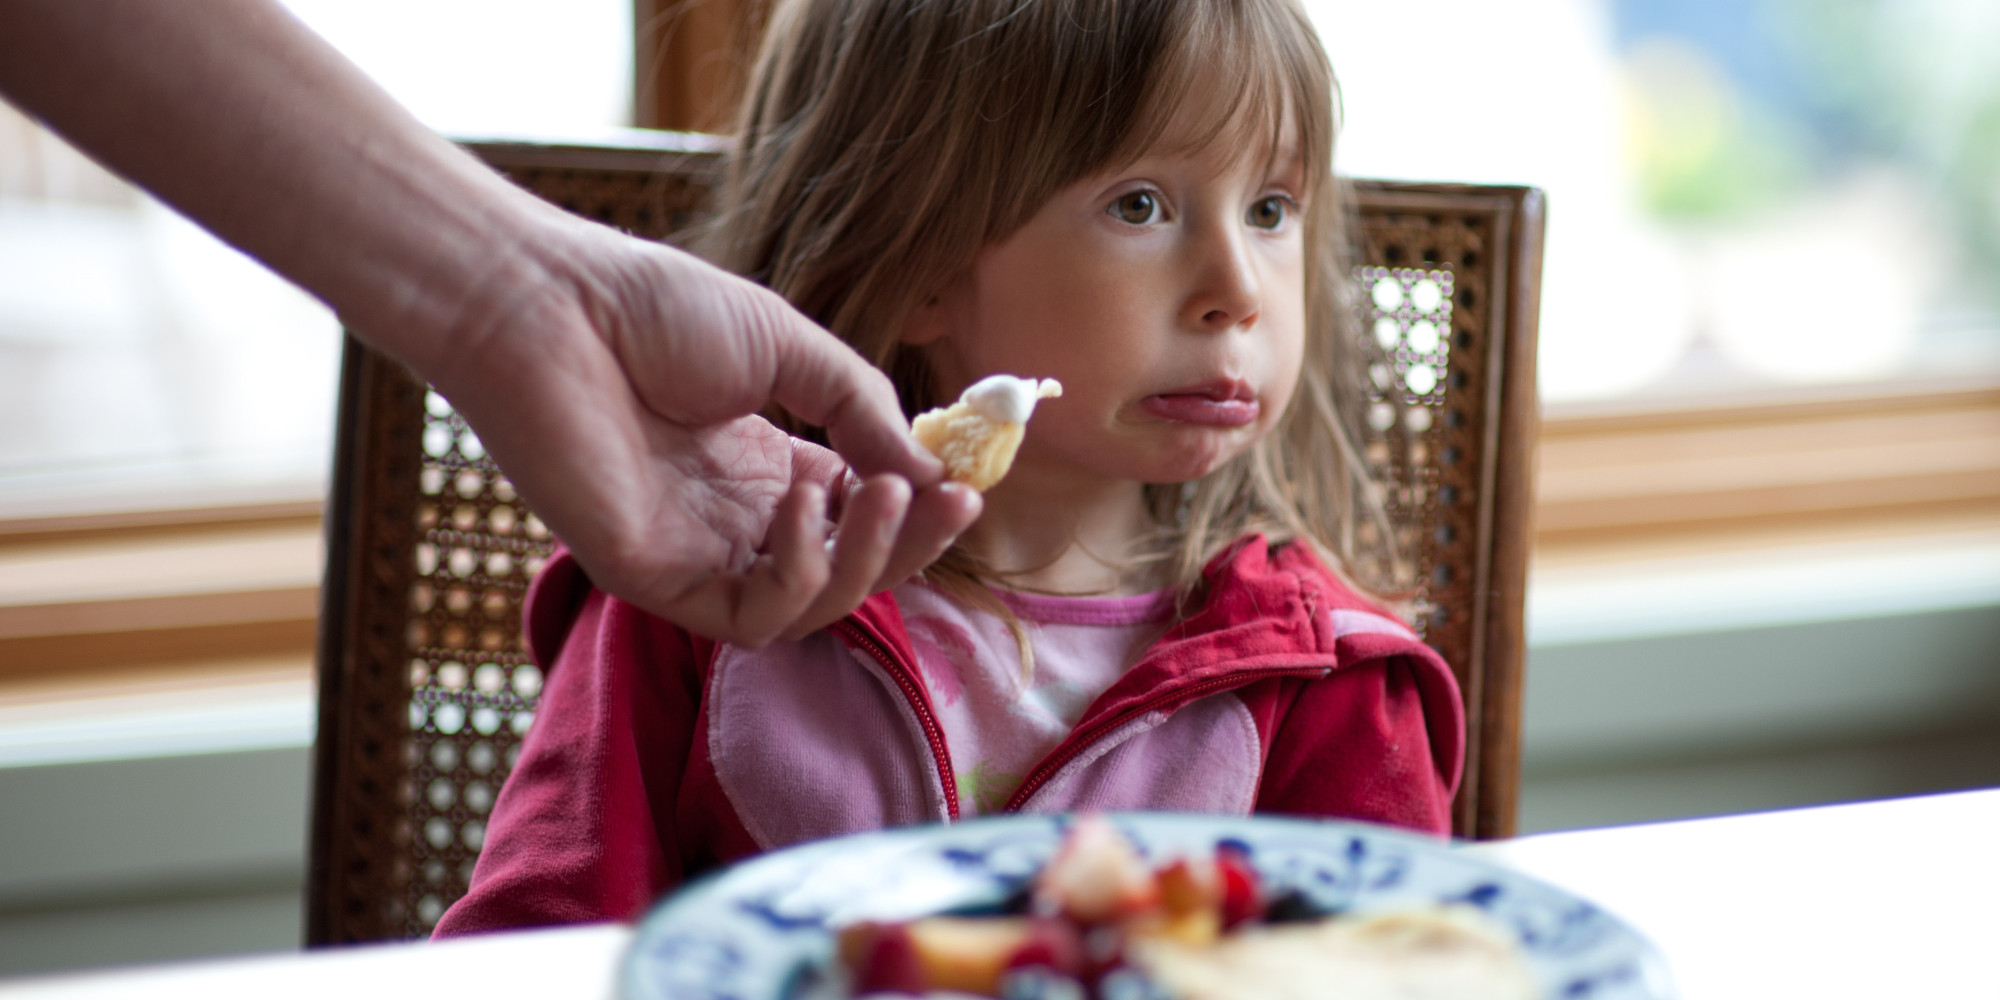 Eating disorders: 9 mistakes parents make - Photo 1 - Pictures - CBS News